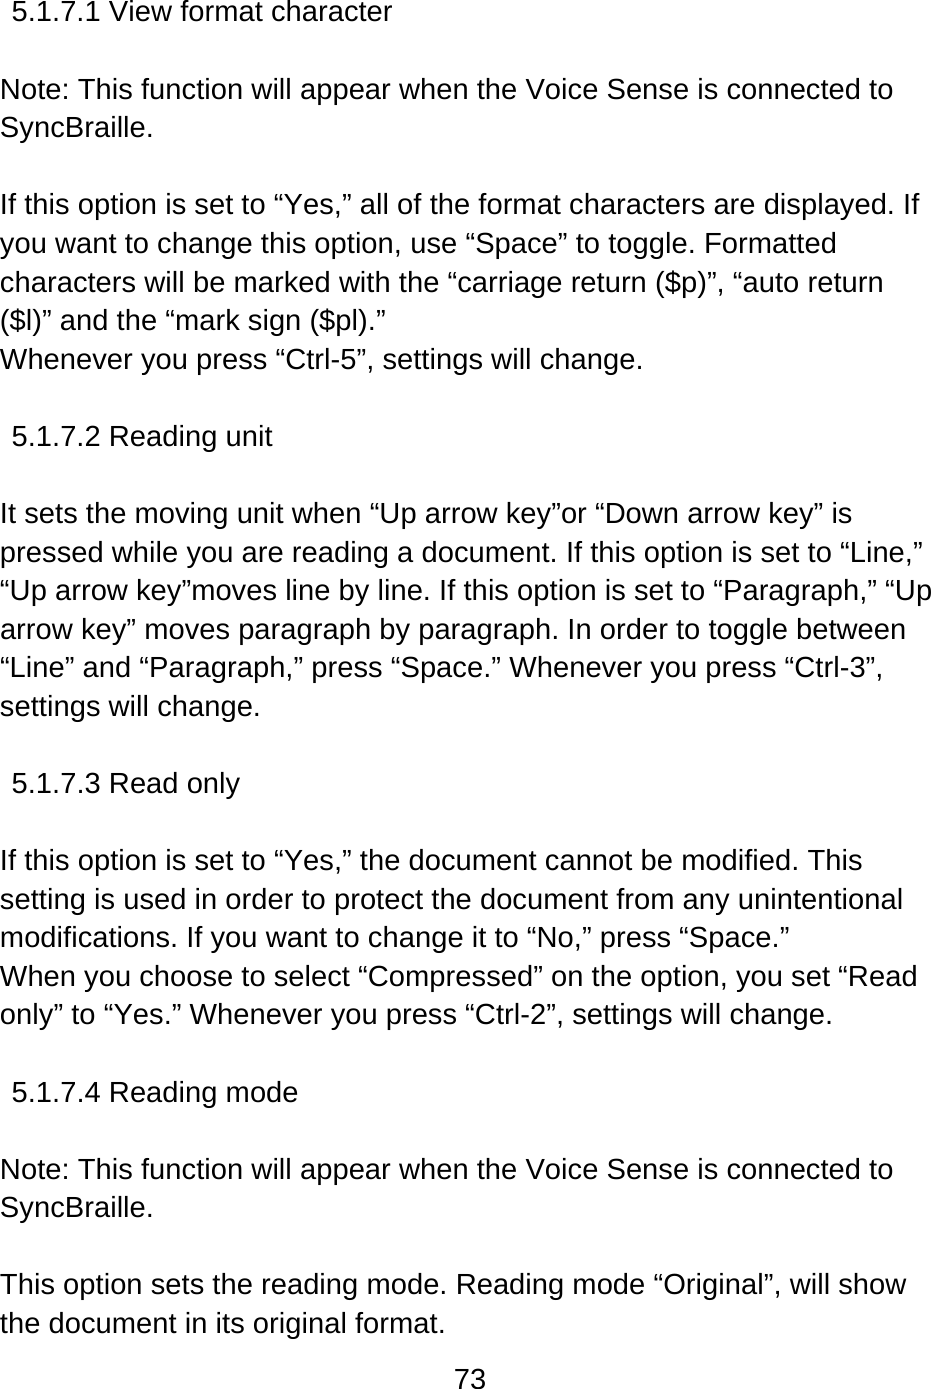 73   5.1.7.1 View format character    Note: This function will appear when the Voice Sense is connected to SyncBraille.  If this option is set to “Yes,” all of the format characters are displayed. If you want to change this option, use “Space” to toggle. Formatted characters will be marked with the “carriage return ($p)”, “auto return ($l)” and the “mark sign ($pl).” Whenever you press “Ctrl-5”, settings will change.  5.1.7.2 Reading unit    It sets the moving unit when “Up arrow key”or “Down arrow key” is pressed while you are reading a document. If this option is set to “Line,” “Up arrow key”moves line by line. If this option is set to “Paragraph,” “Up arrow key” moves paragraph by paragraph. In order to toggle between “Line” and “Paragraph,” press “Space.” Whenever you press “Ctrl-3”, settings will change.  5.1.7.3 Read only    If this option is set to “Yes,” the document cannot be modified. This setting is used in order to protect the document from any unintentional modifications. If you want to change it to “No,” press “Space.” When you choose to select “Compressed” on the option, you set “Read only” to “Yes.” Whenever you press “Ctrl-2”, settings will change.  5.1.7.4 Reading mode  Note: This function will appear when the Voice Sense is connected to SyncBraille.  This option sets the reading mode. Reading mode “Original”, will show the document in its original format. 